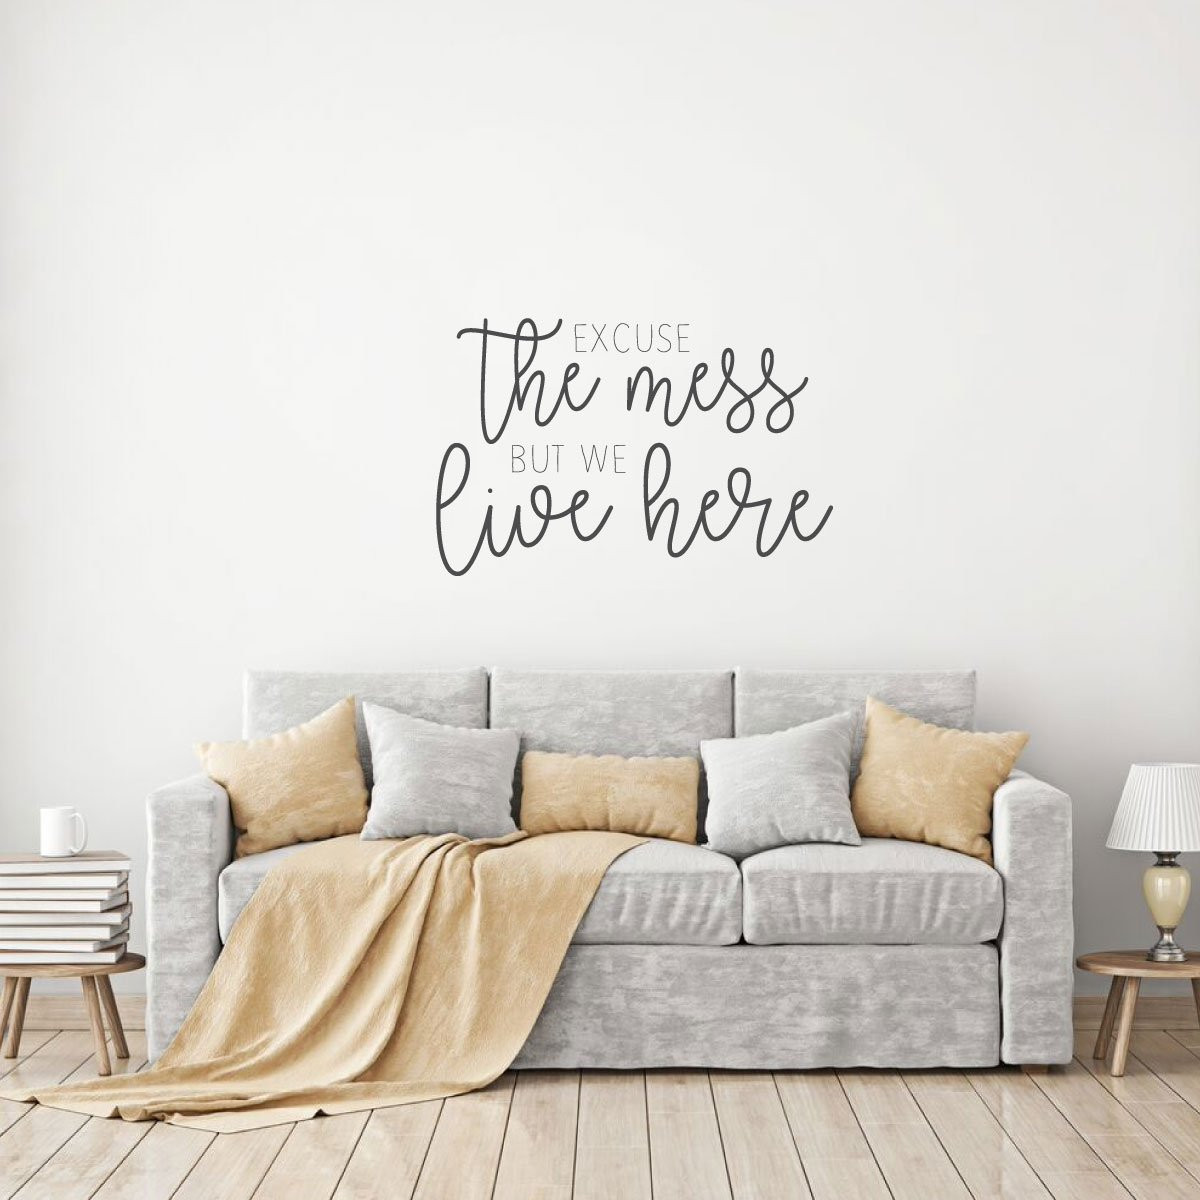 Wall Decals For Living Room
 Excuse the Mess Quote for Living Room Vinyl Home Decor